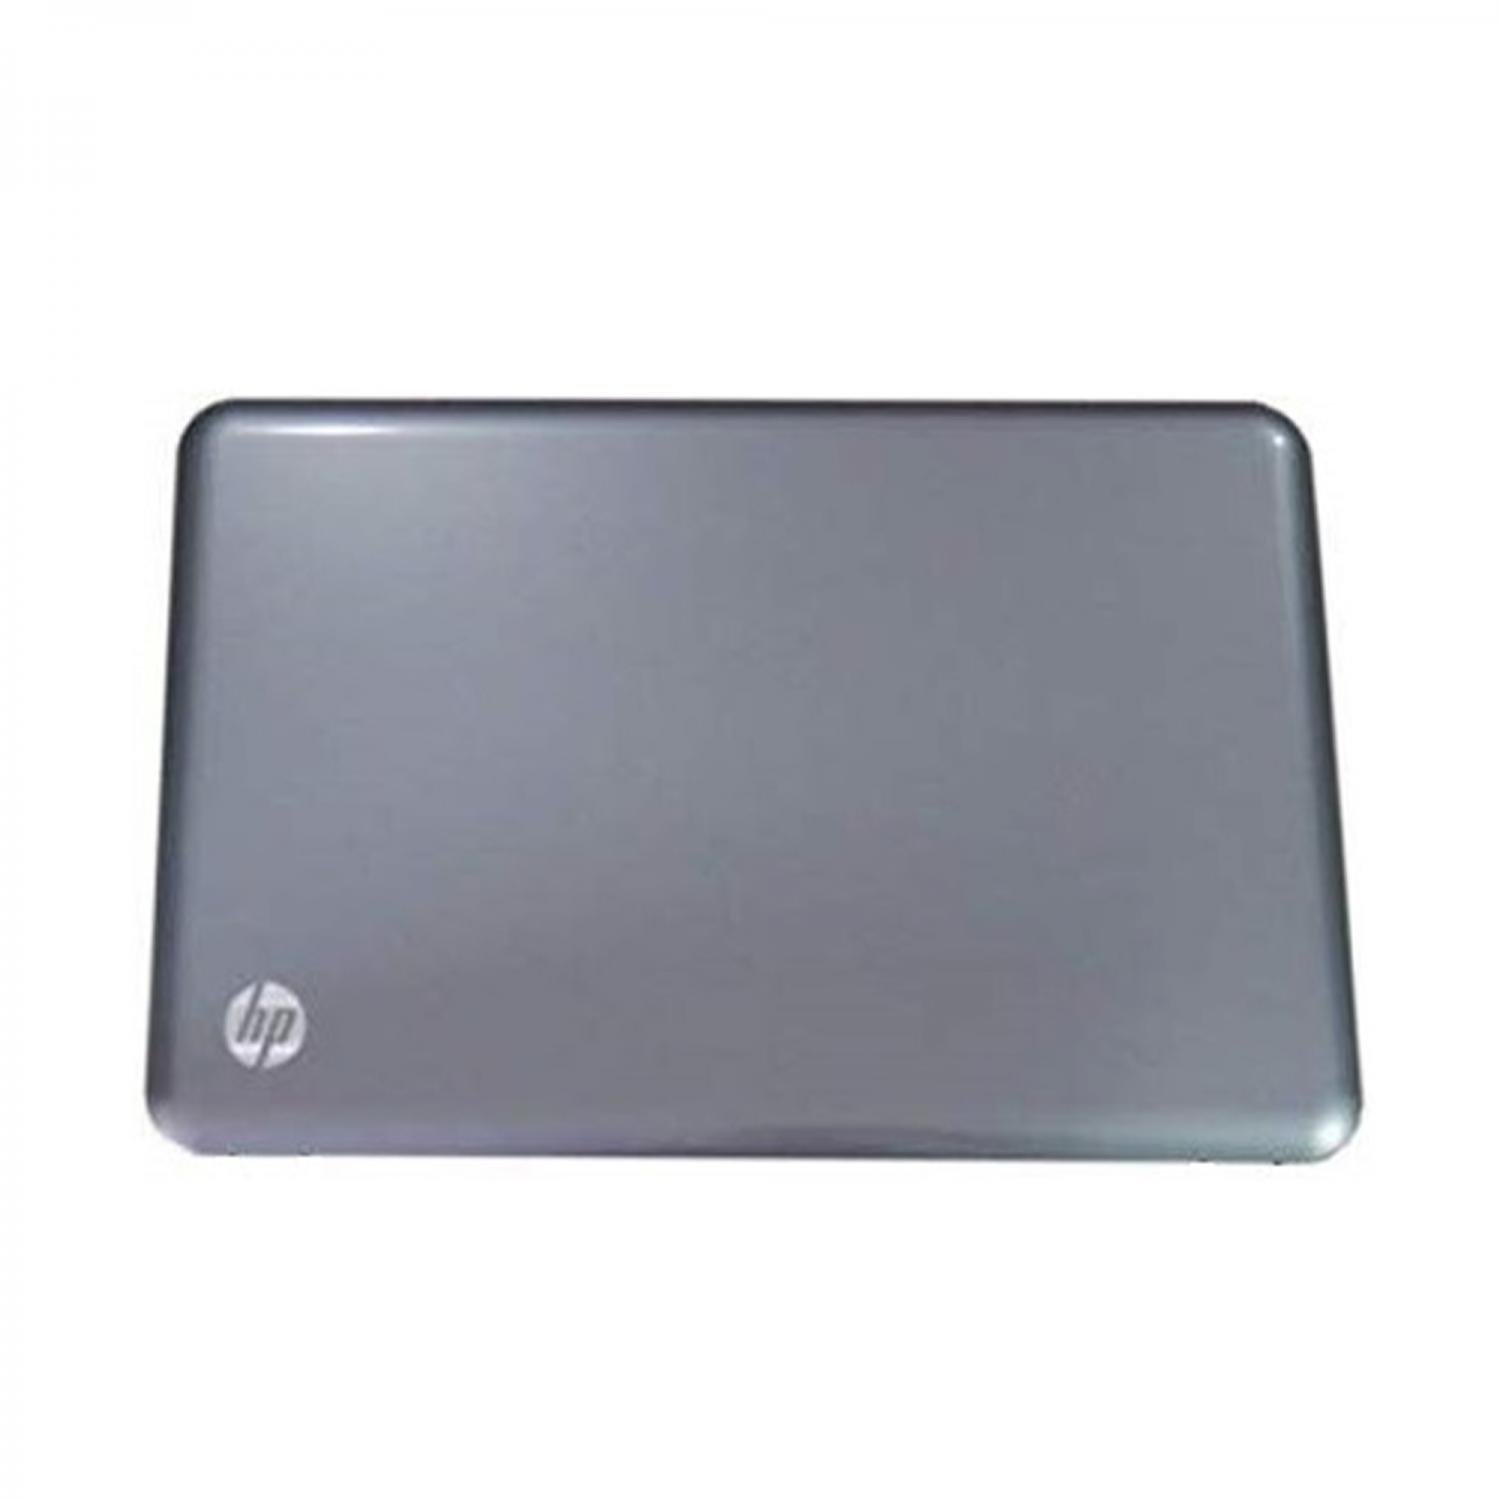 Hp Pavilion G6-1000 G6-1100 G6-1200 OEM LCD Back Cover Top Lid With Front Trim Bezel P/N 643245-001